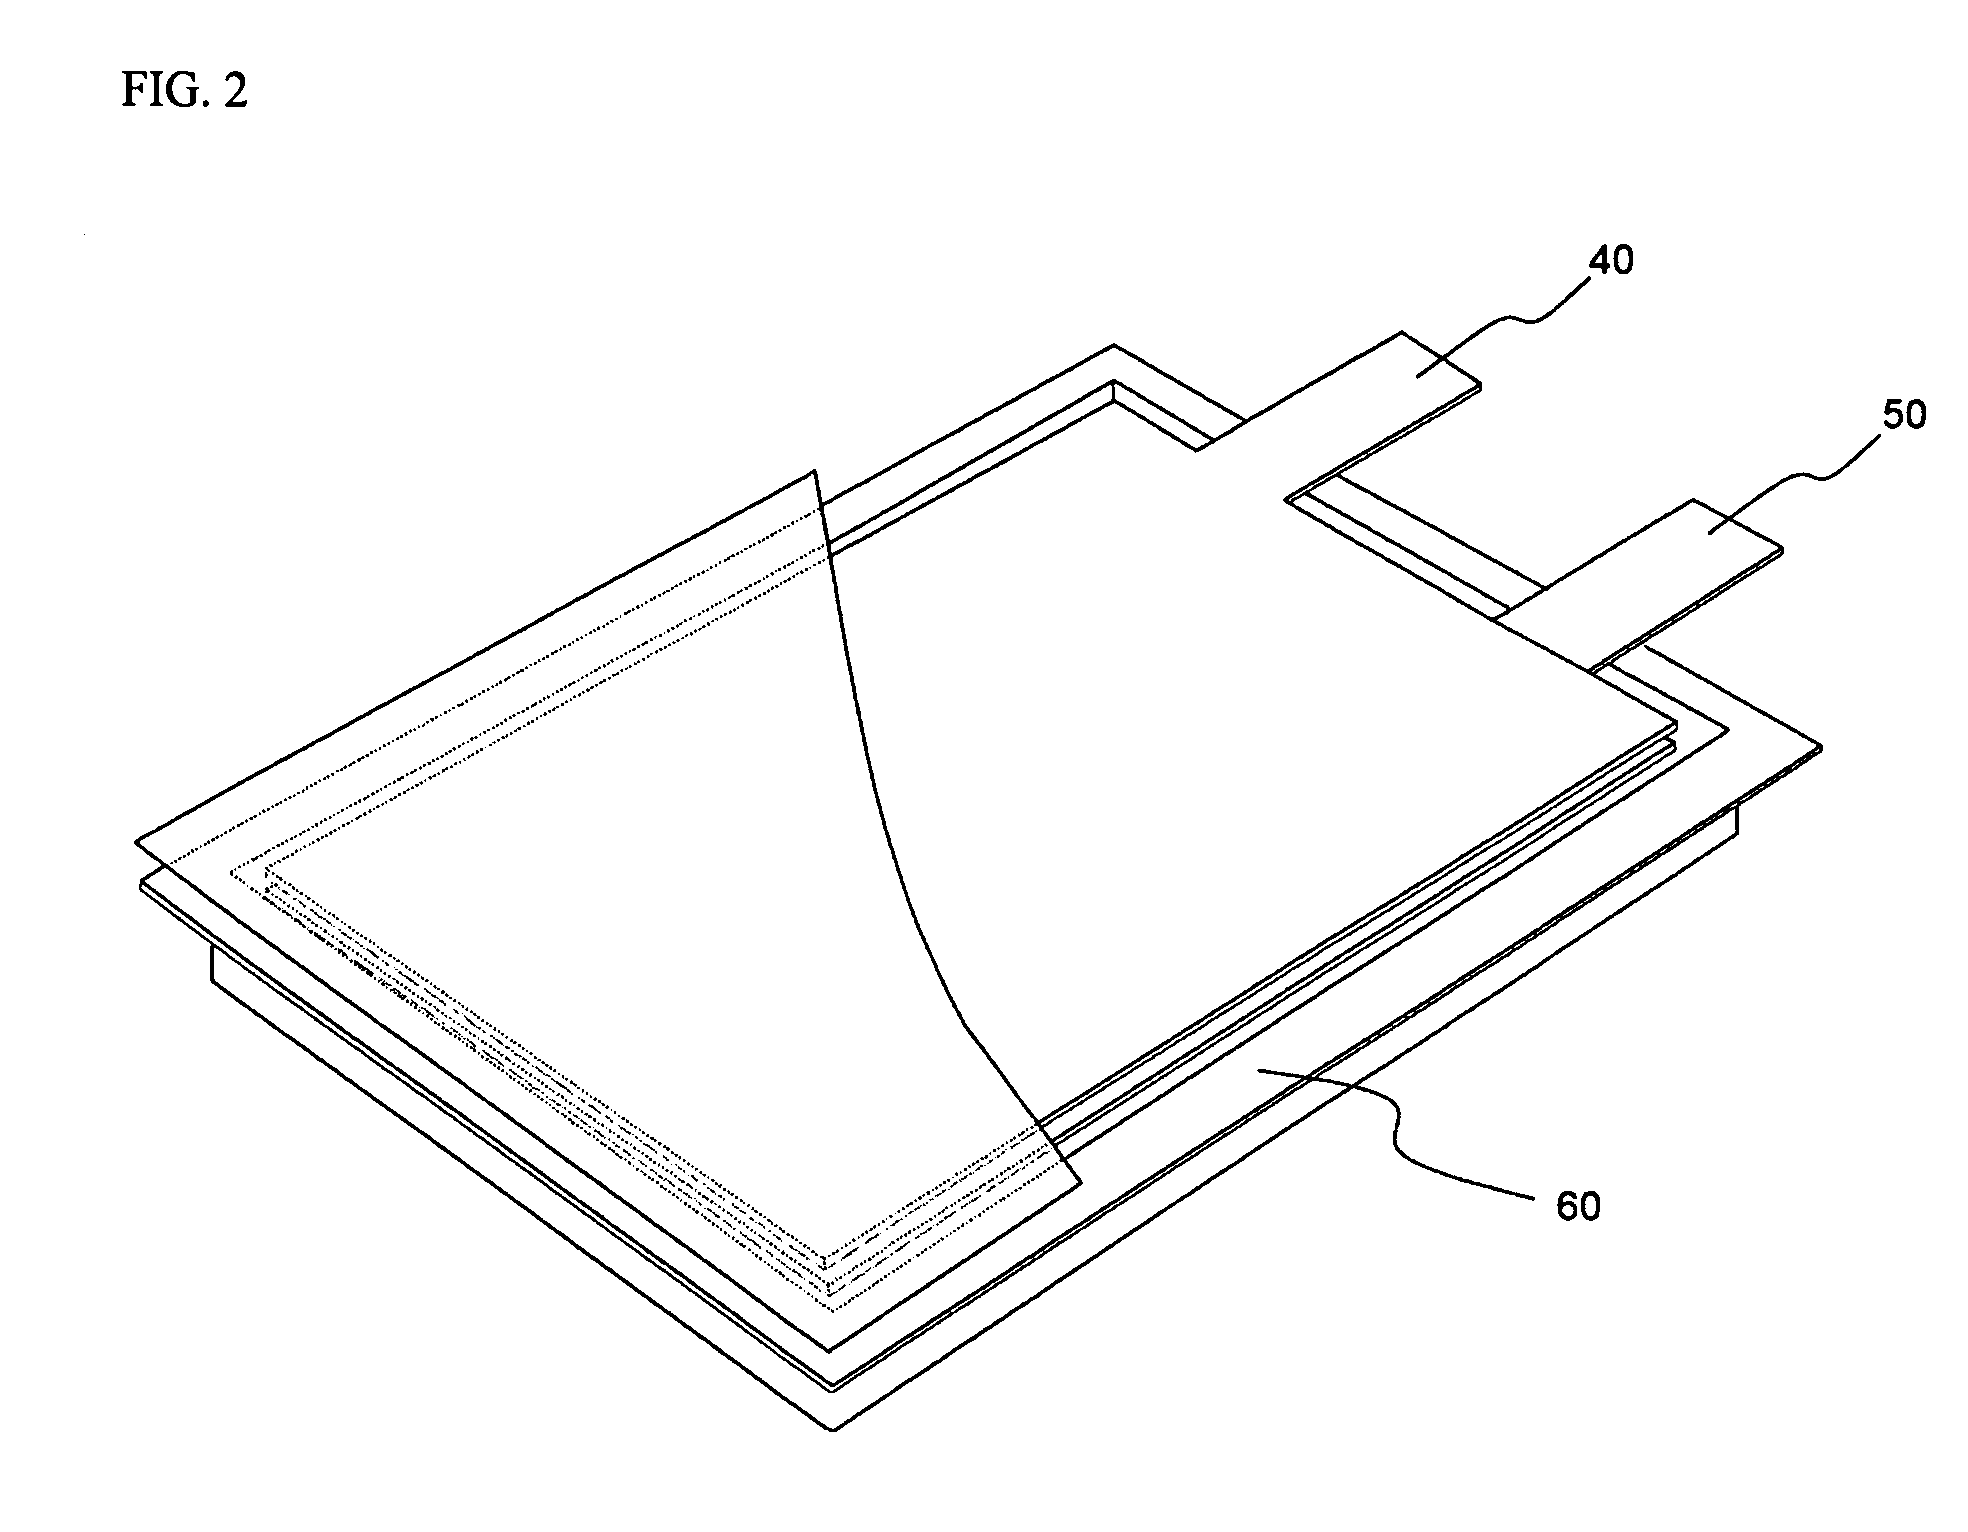 Lithium secondary battery with high power